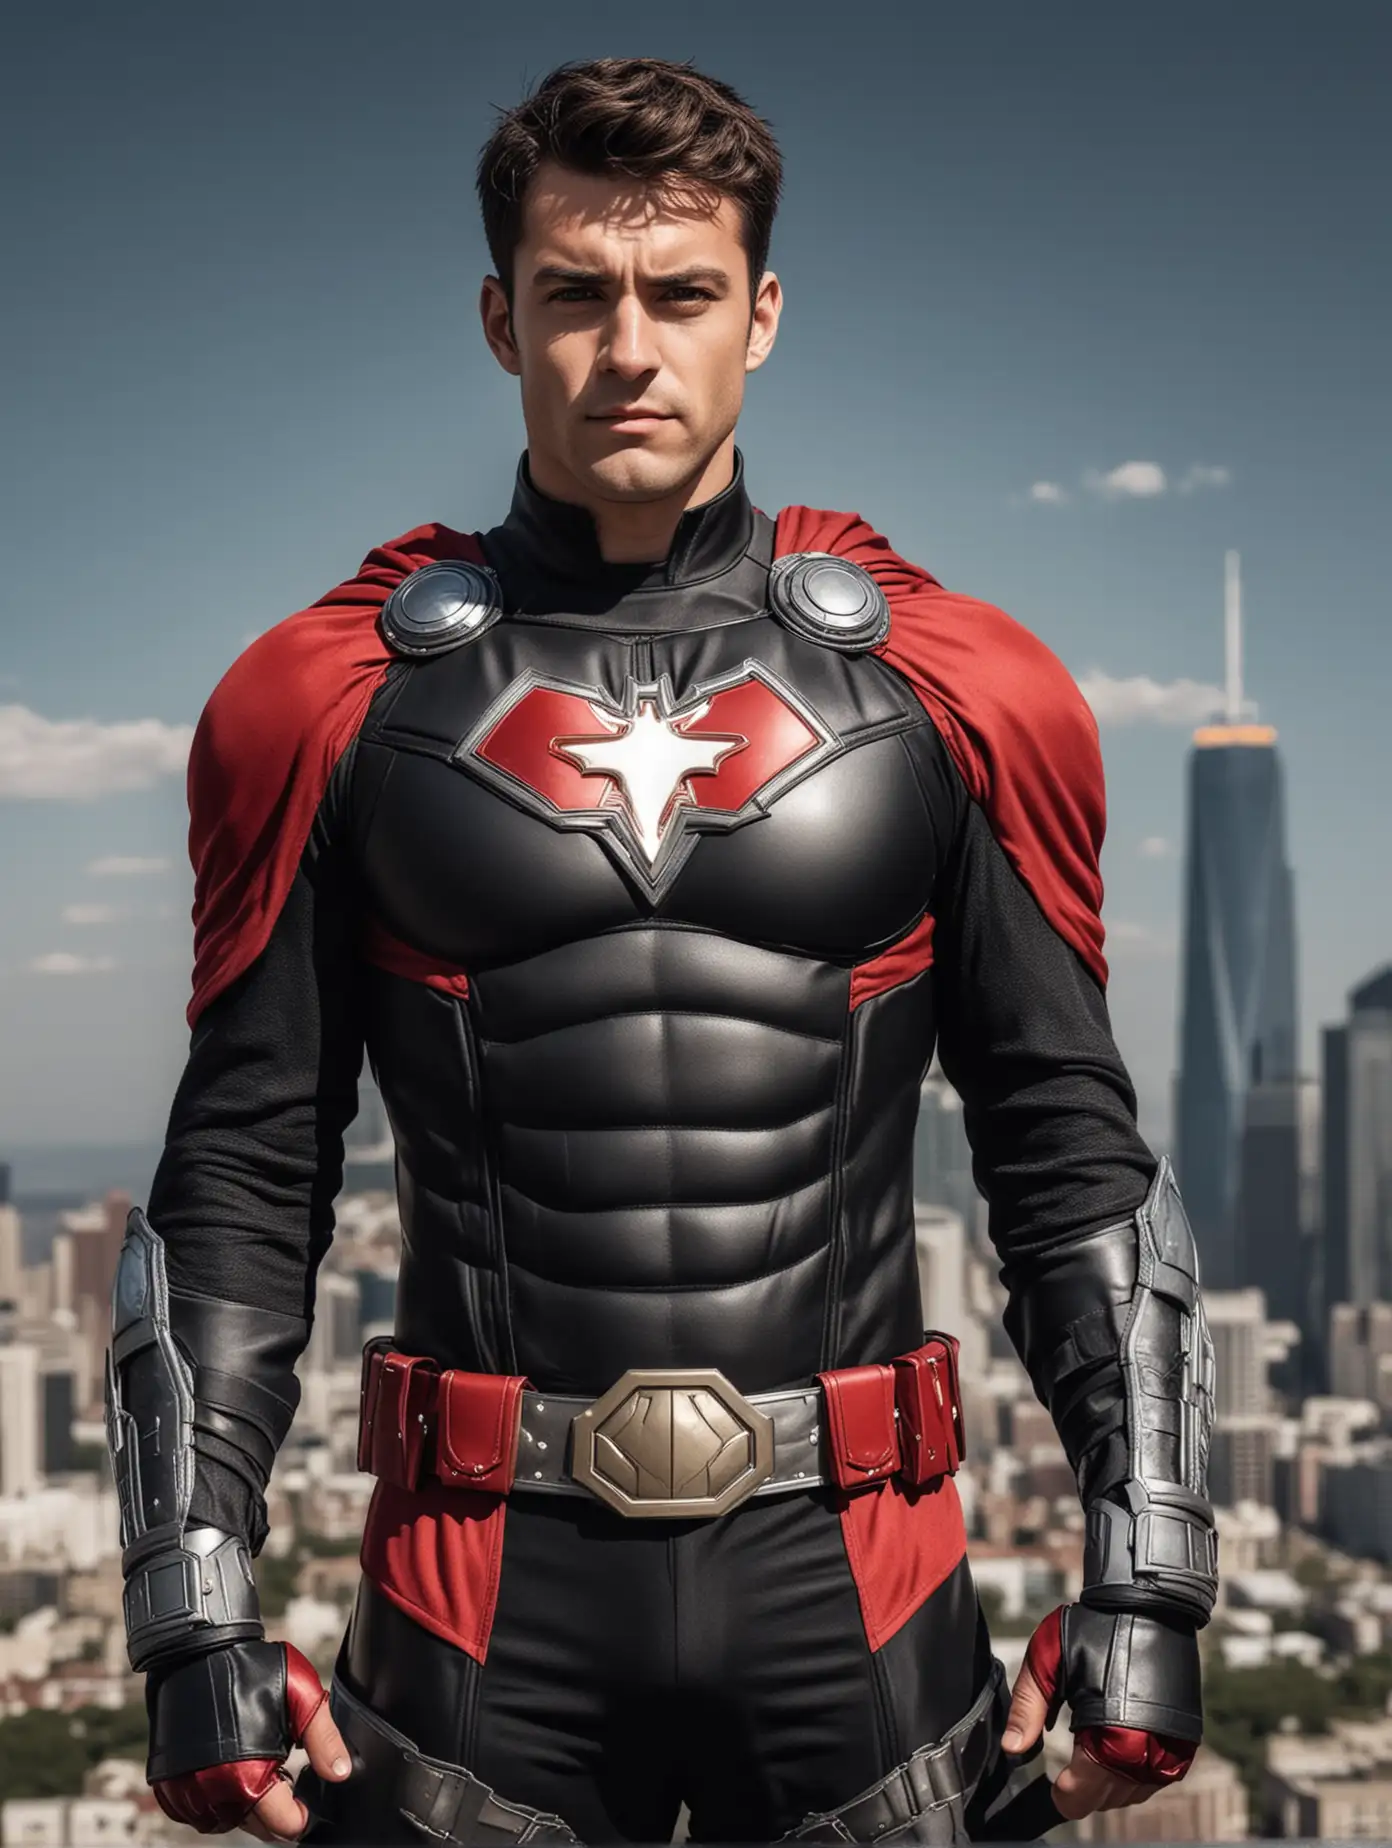 super hero man looking straight at the camera ,
dressed in super hero suit with belt the suit in black, little red and little blue , armor, belt, in eclipse skyline waist up 


